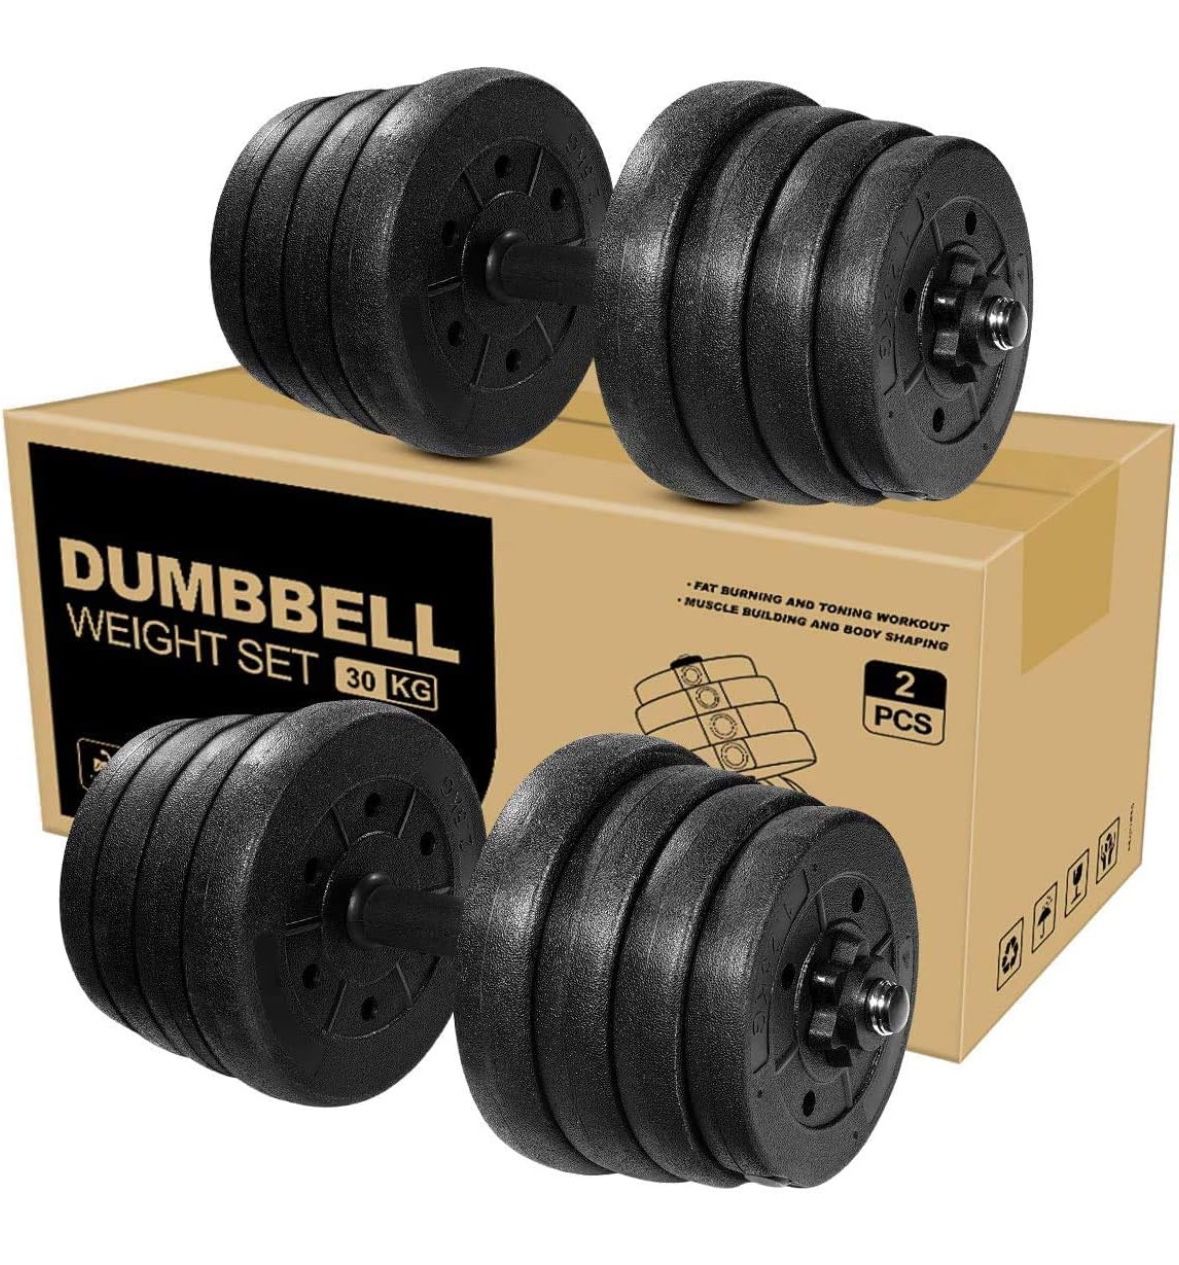 Adjustable Dumbbells Weight Set Up to 64 Pounds Exercise Equipment Training Tool